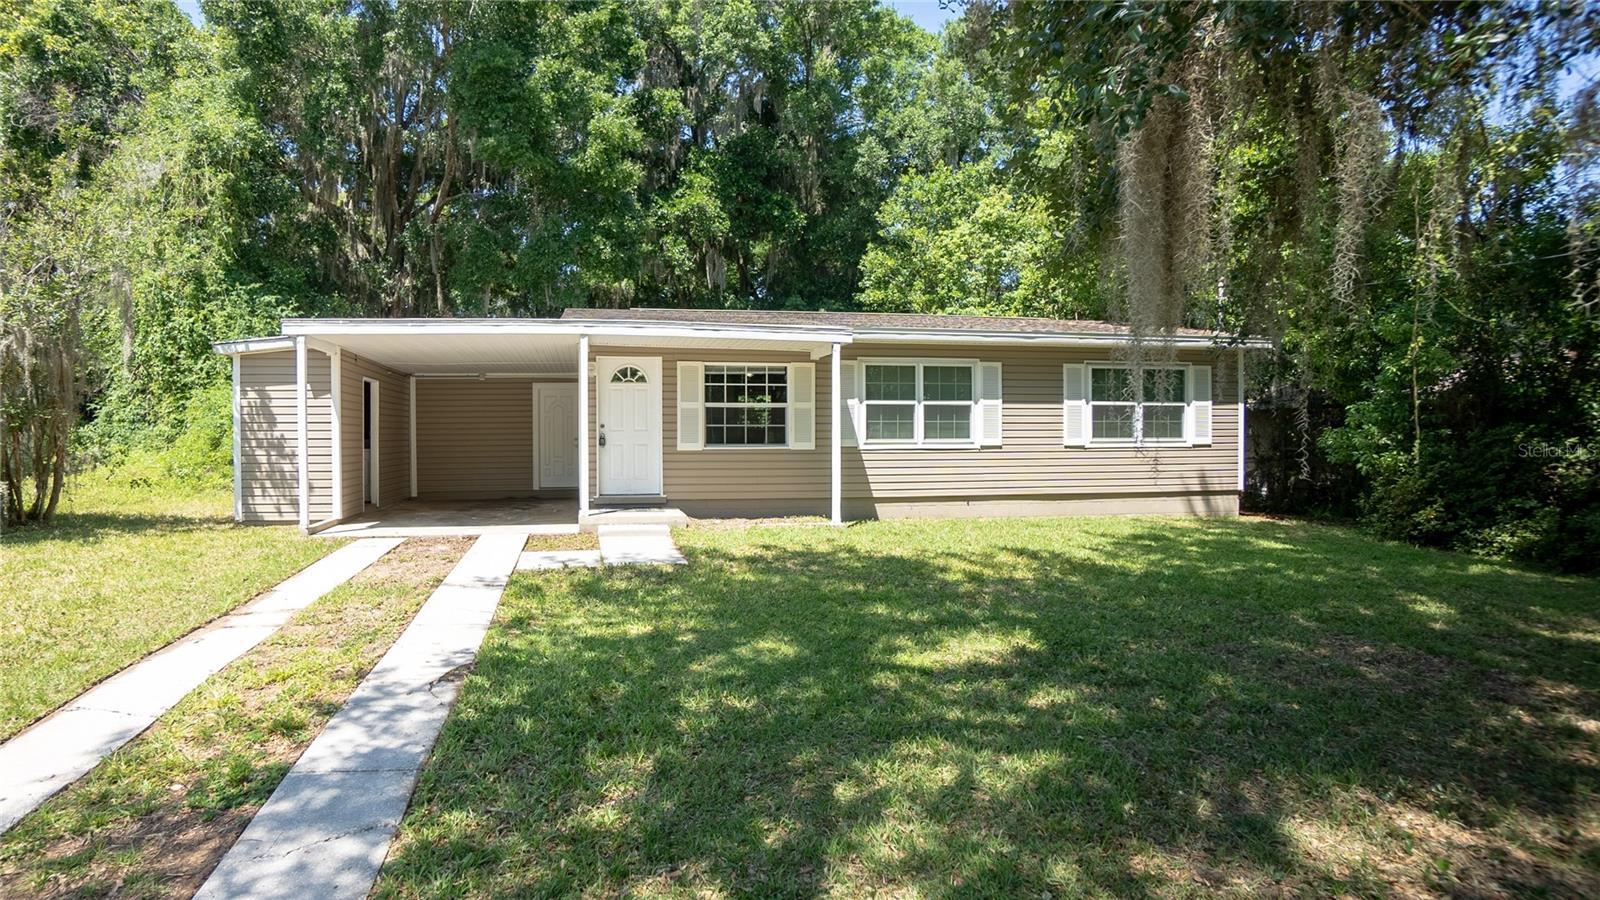 Photo one of 14403 10Th St Dade City FL 33523 | MLS T3520725